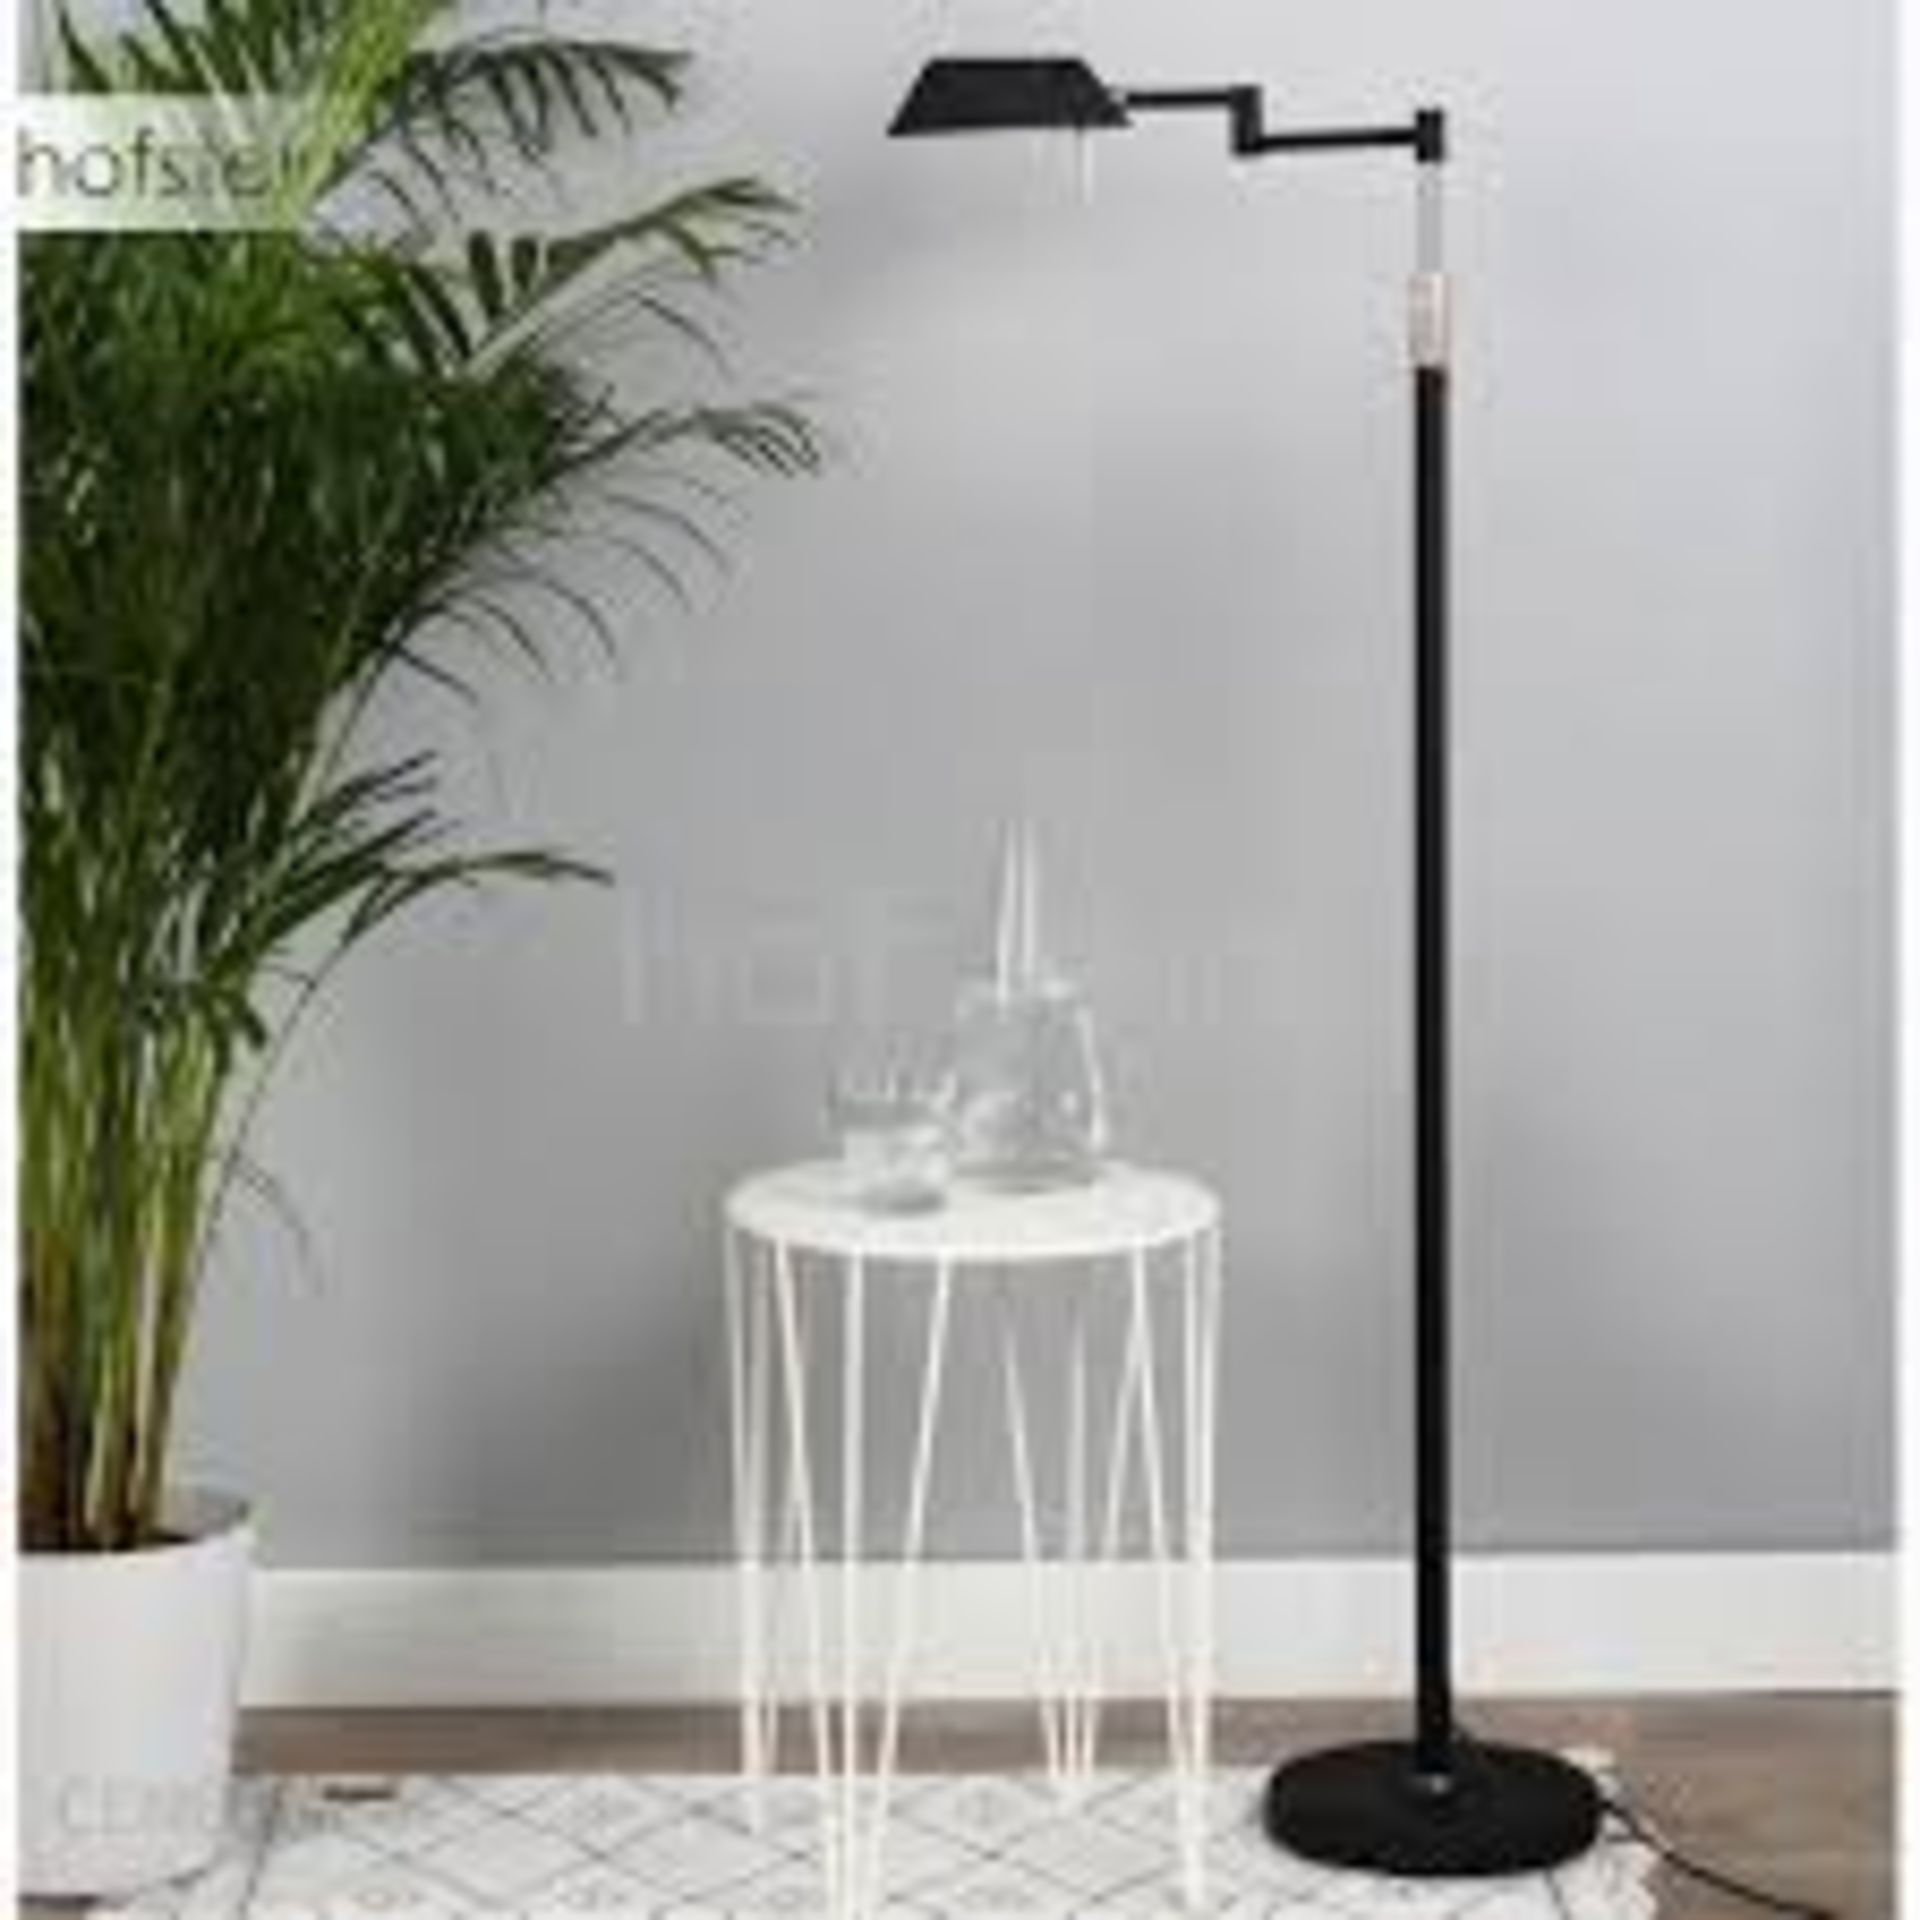 Boxed Mexlite Designer Floor Standing Lamp RRP £150 (Untested Customer Returns)(Appraisals Are